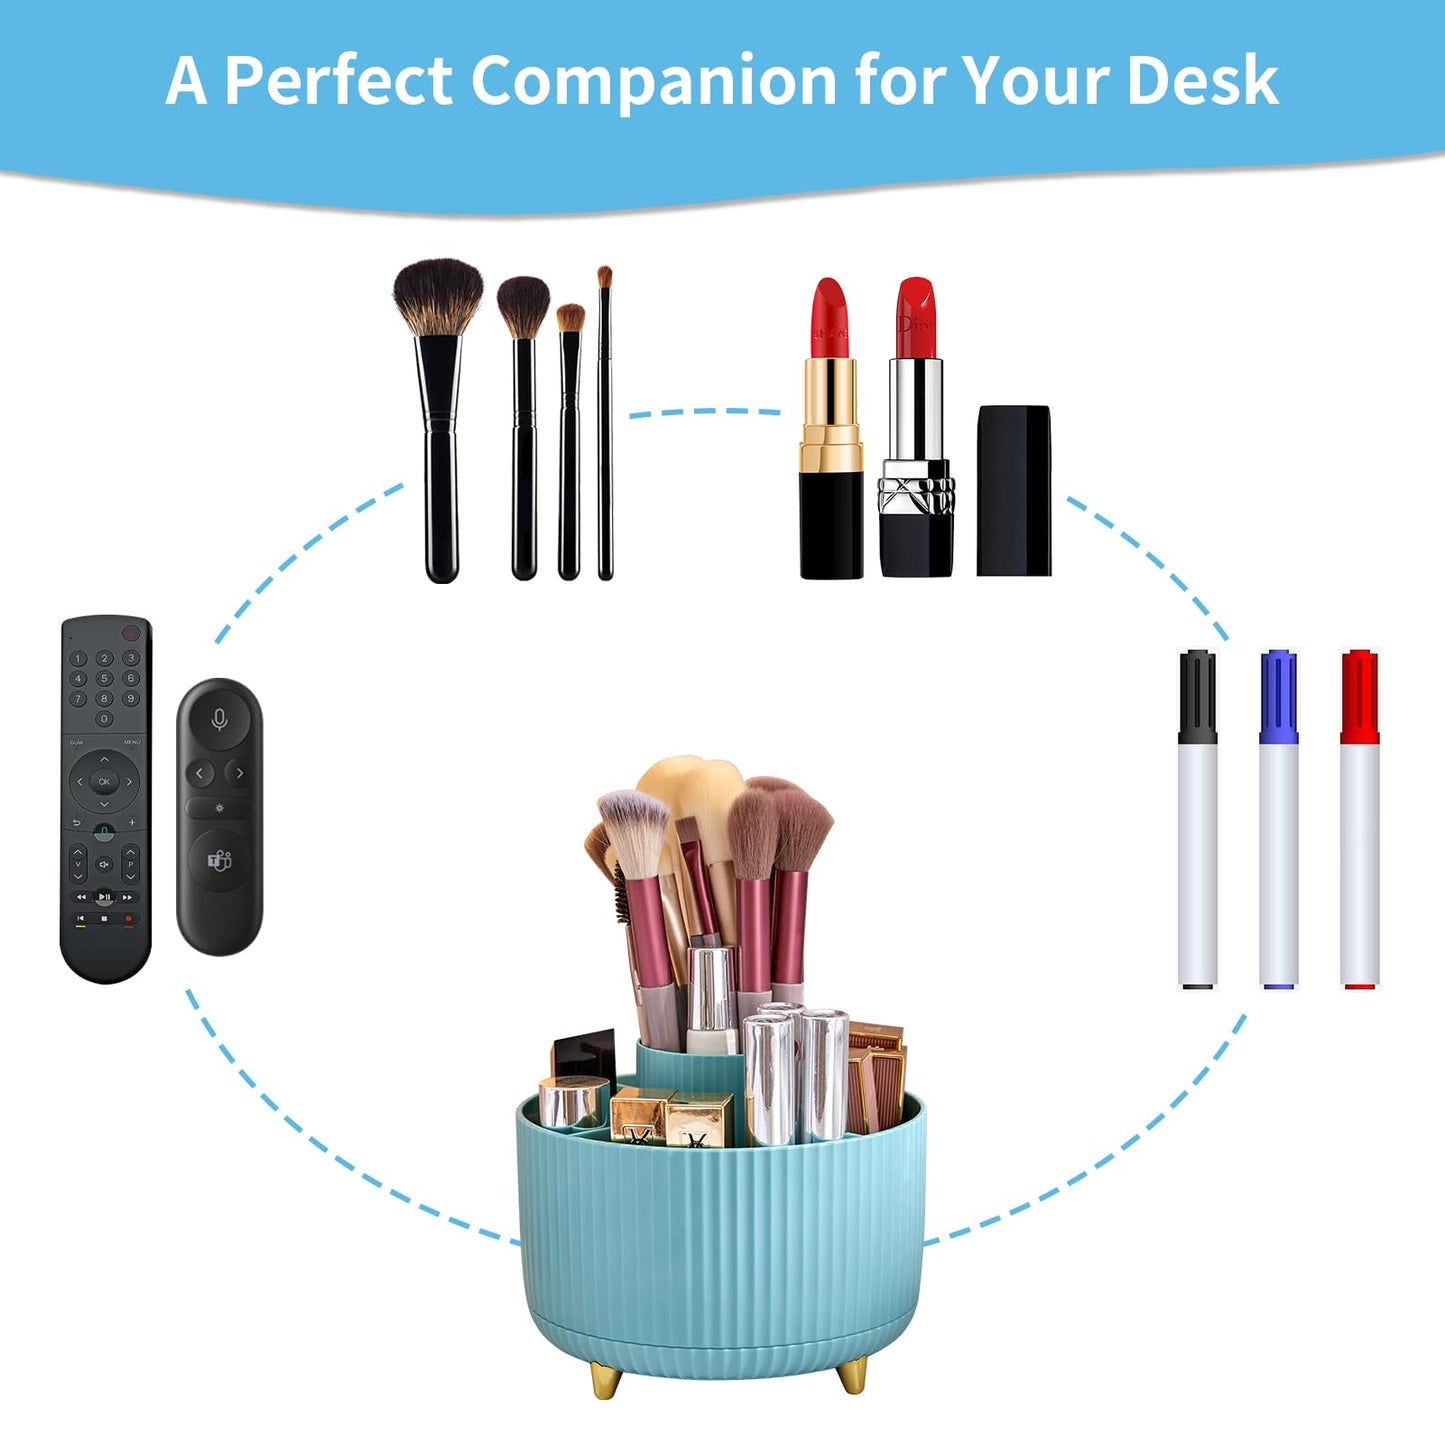 Marbrasse Desk Organizer, 360-Degree Rotating Pen Holder for Desk, Desk Organizers and Accessories with 5 Compartments Pencil Organizer, Art Supply